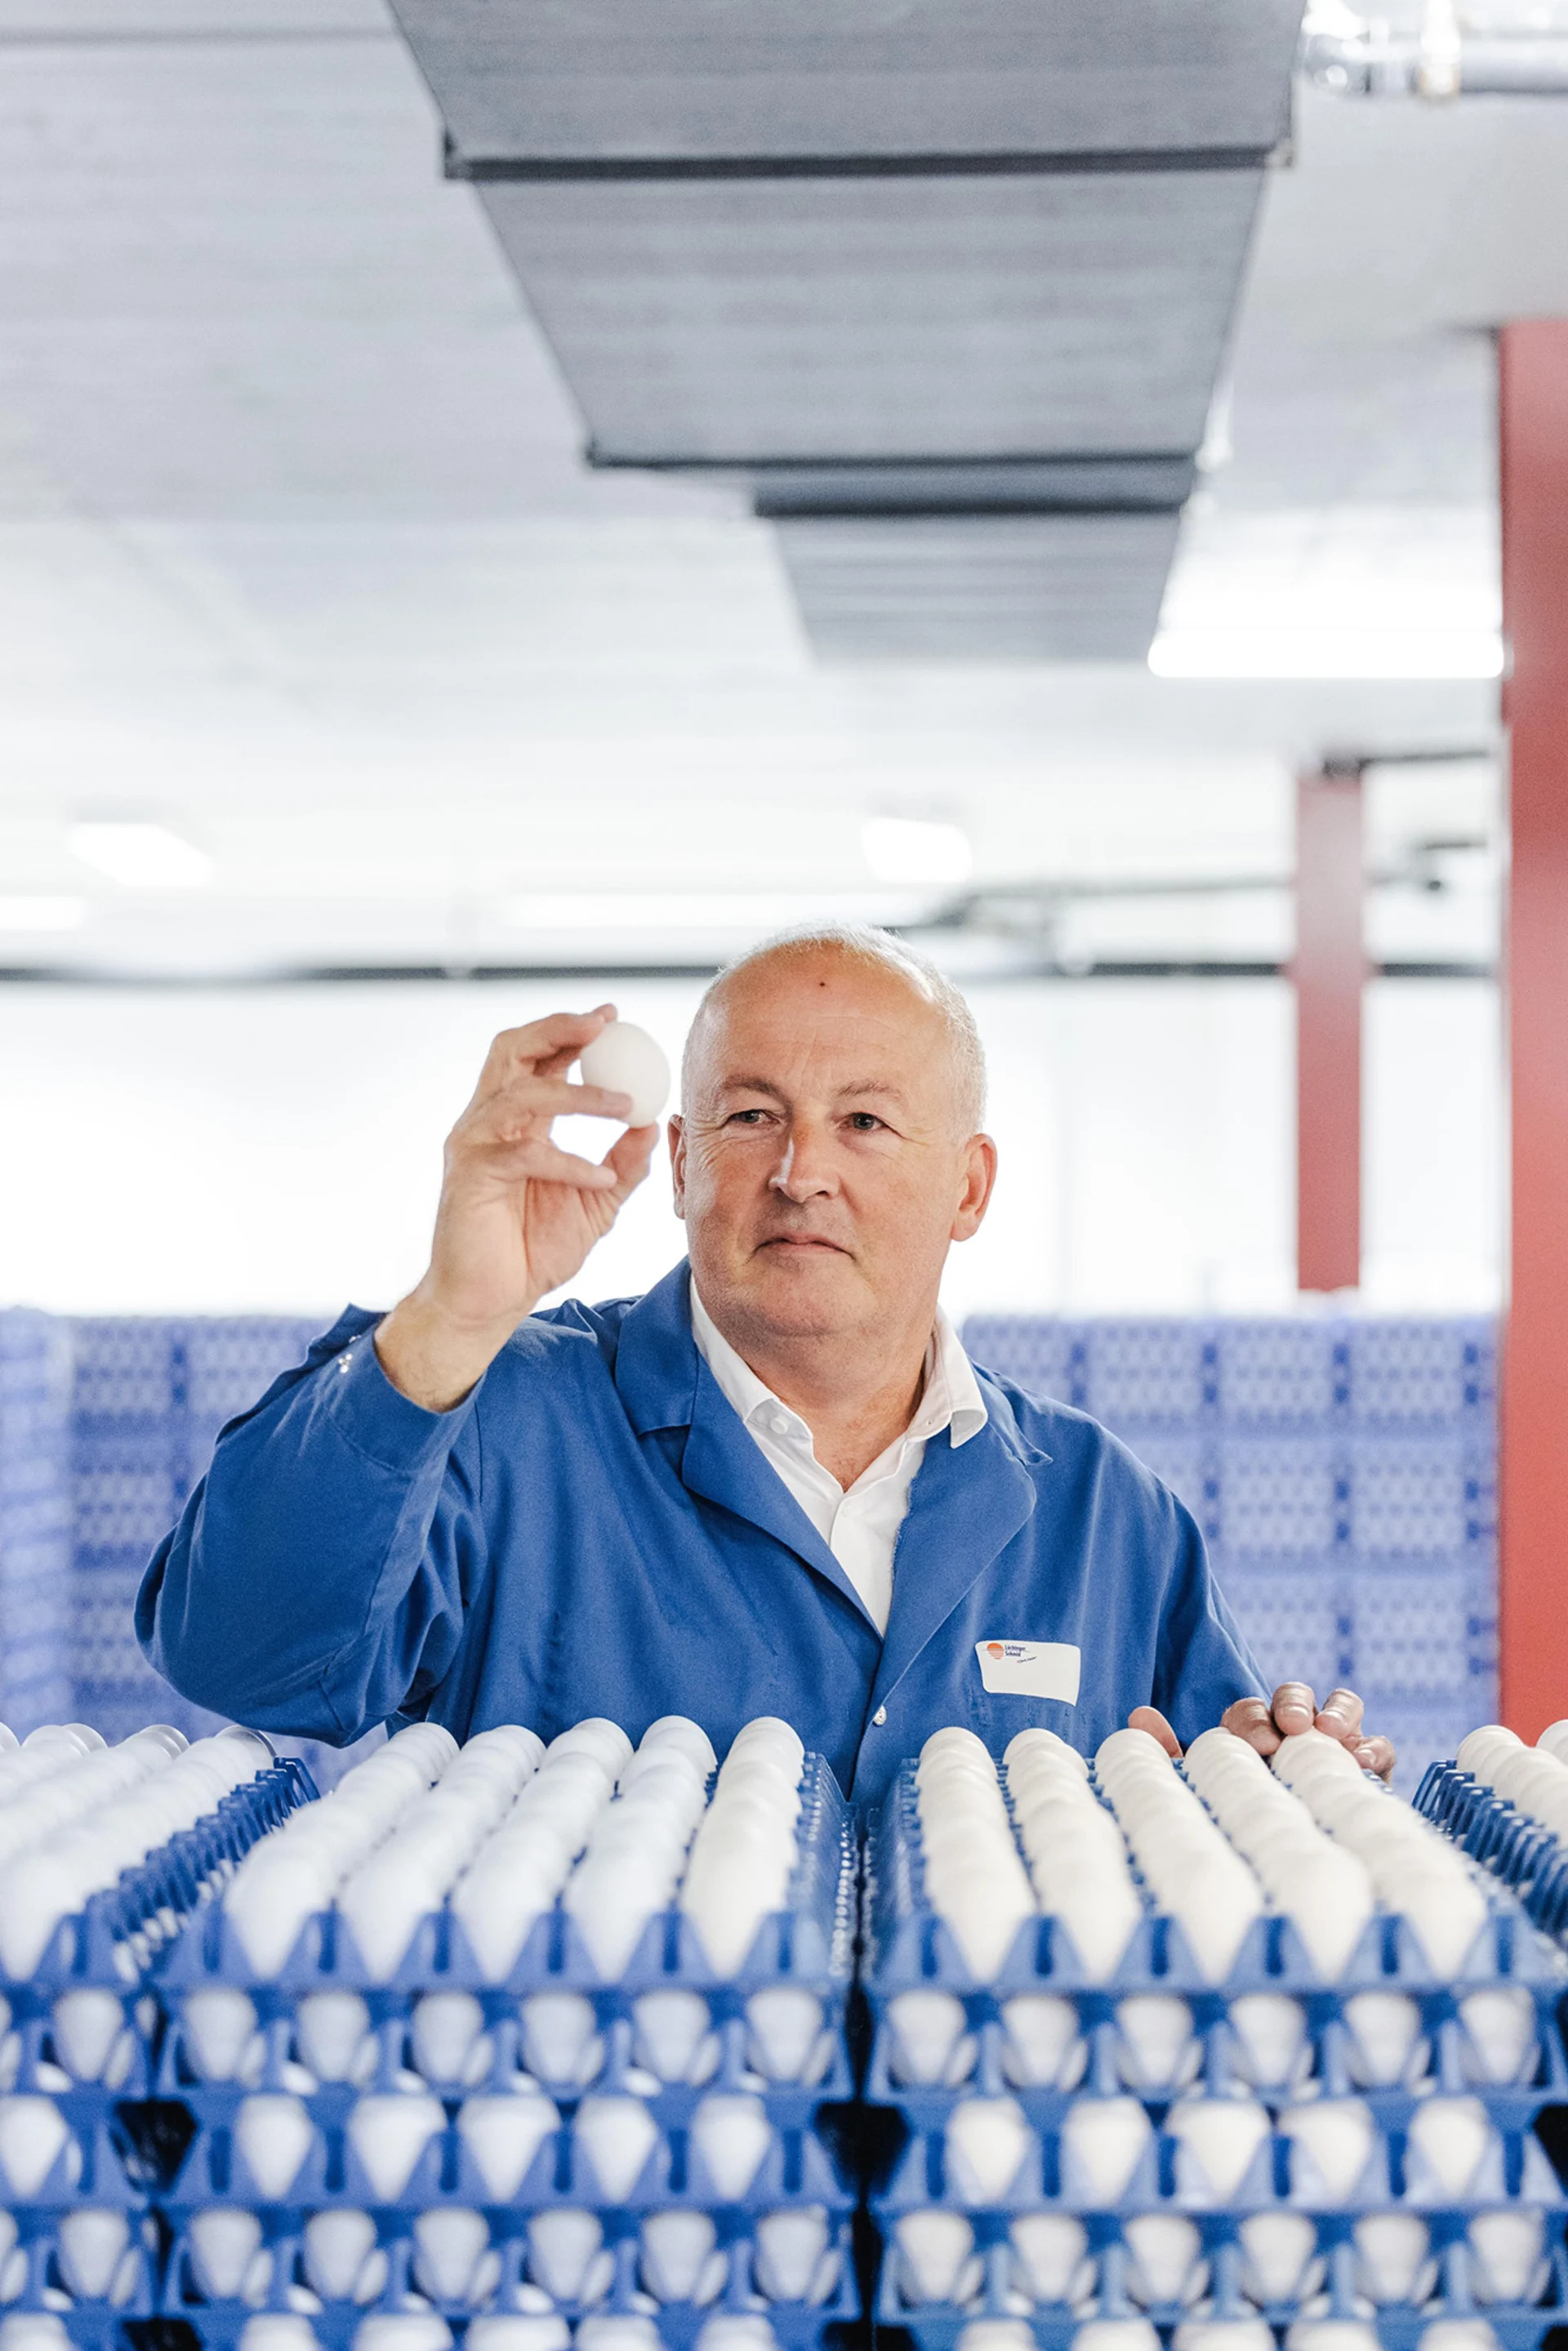 Vincent Genoud checks a delivery of eggs